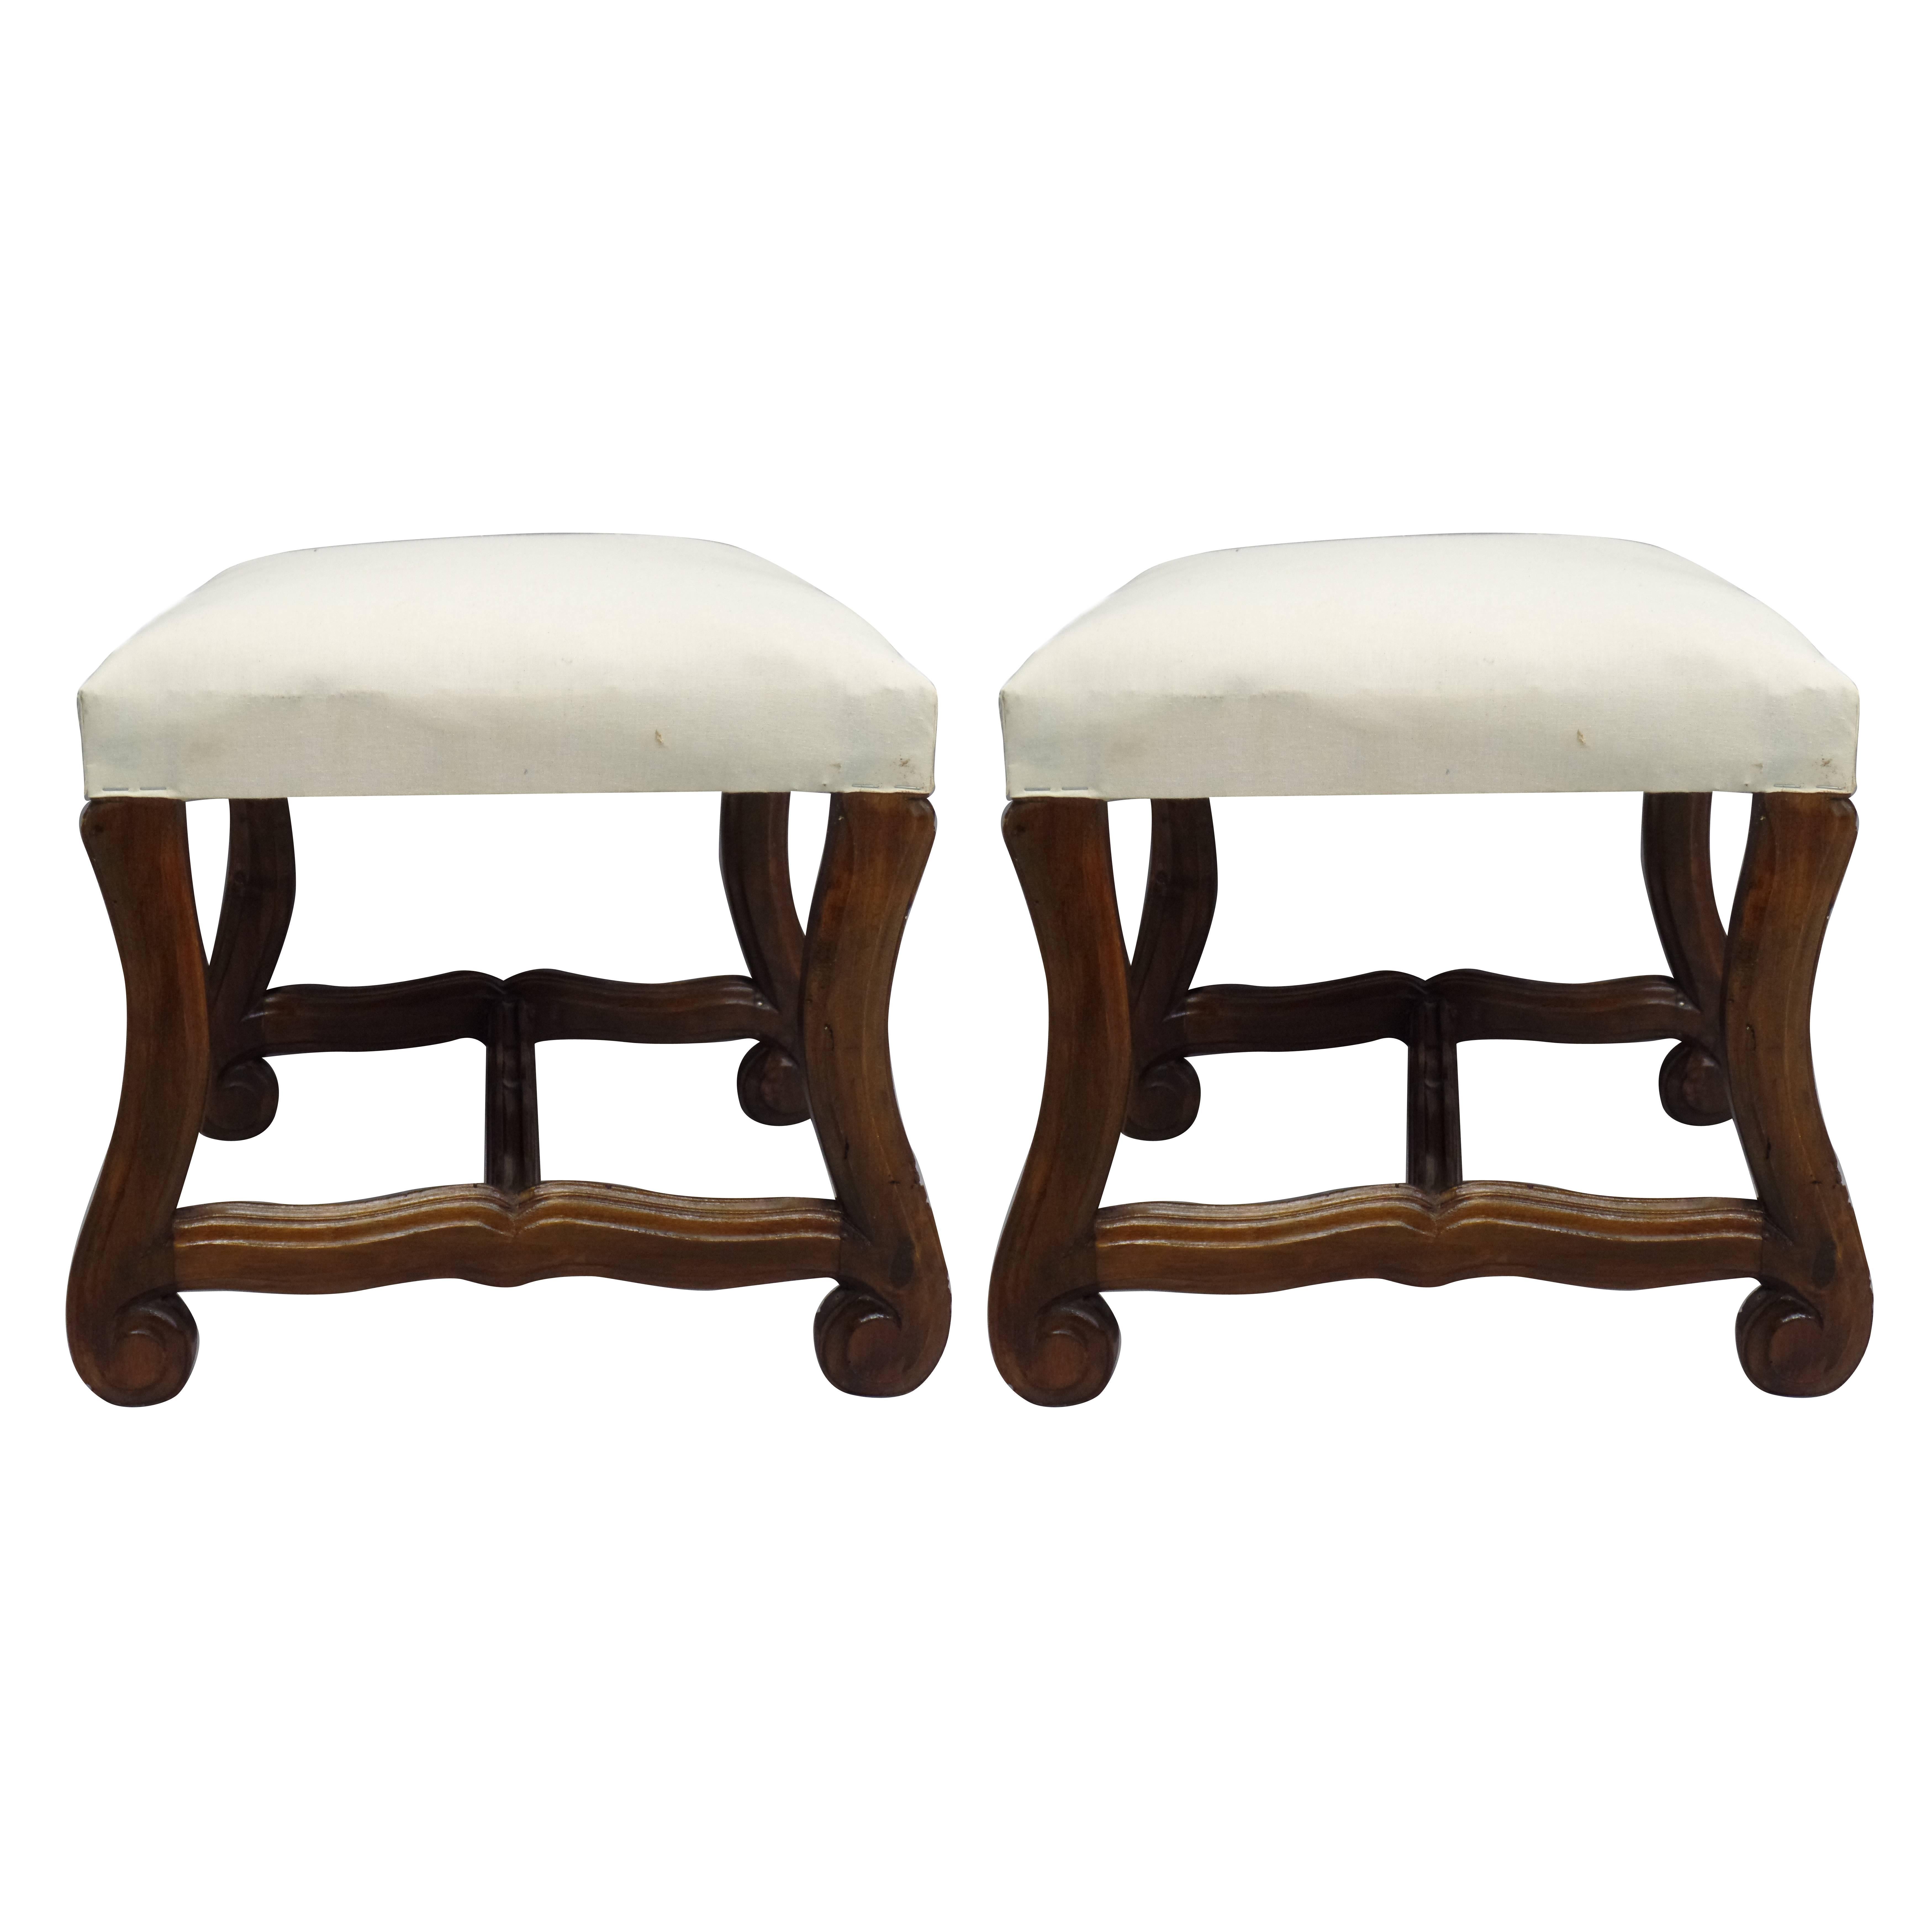 Pair of French 1930s Carved Stools or Benches in the Louis XIV Style